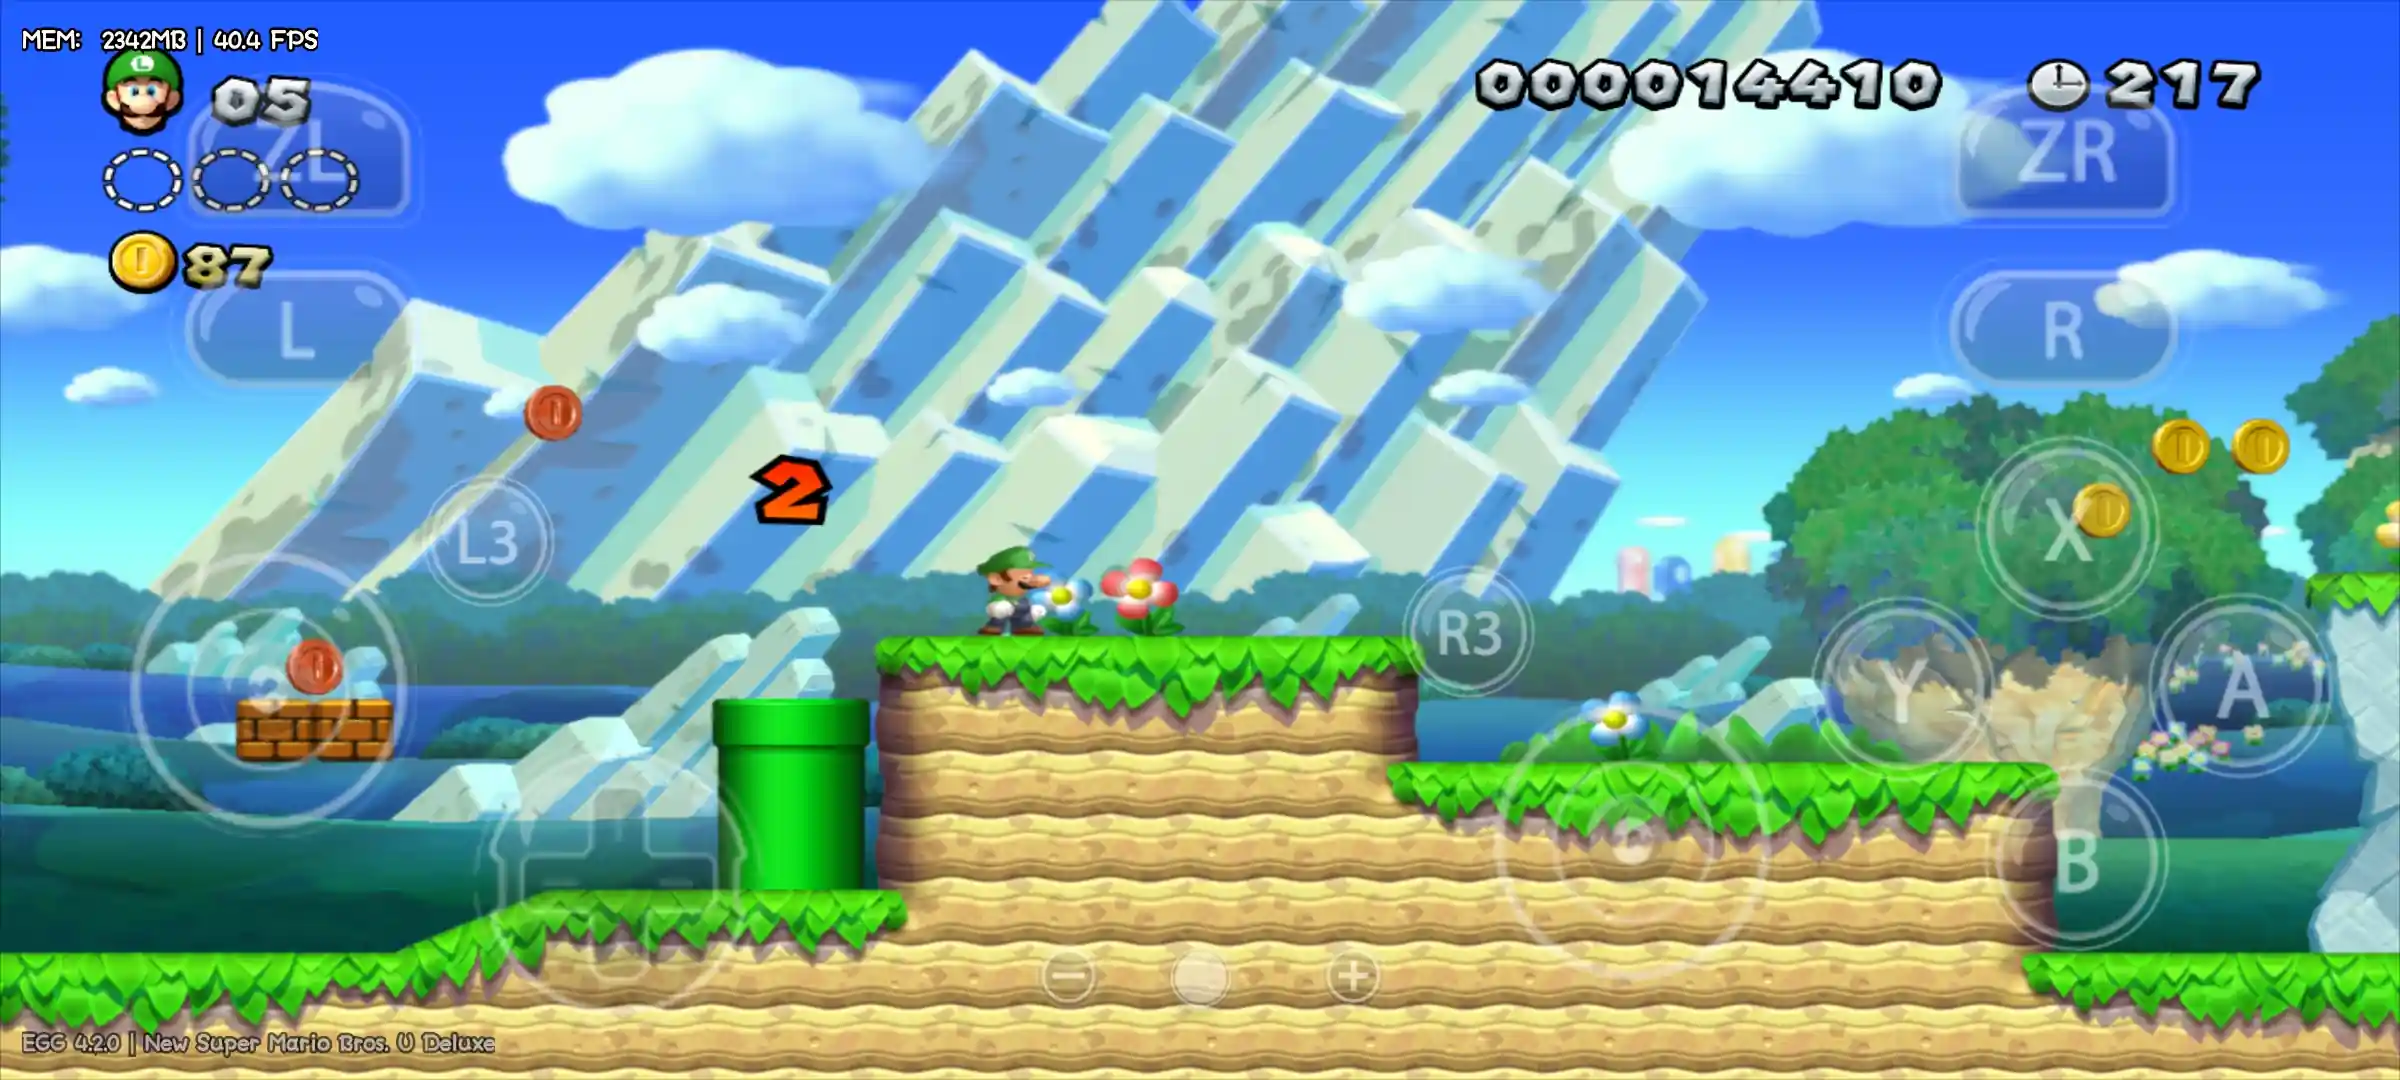 New Super Mario Bros u Deluxe APK + OBB download for Android - EGG NS Android Emulator